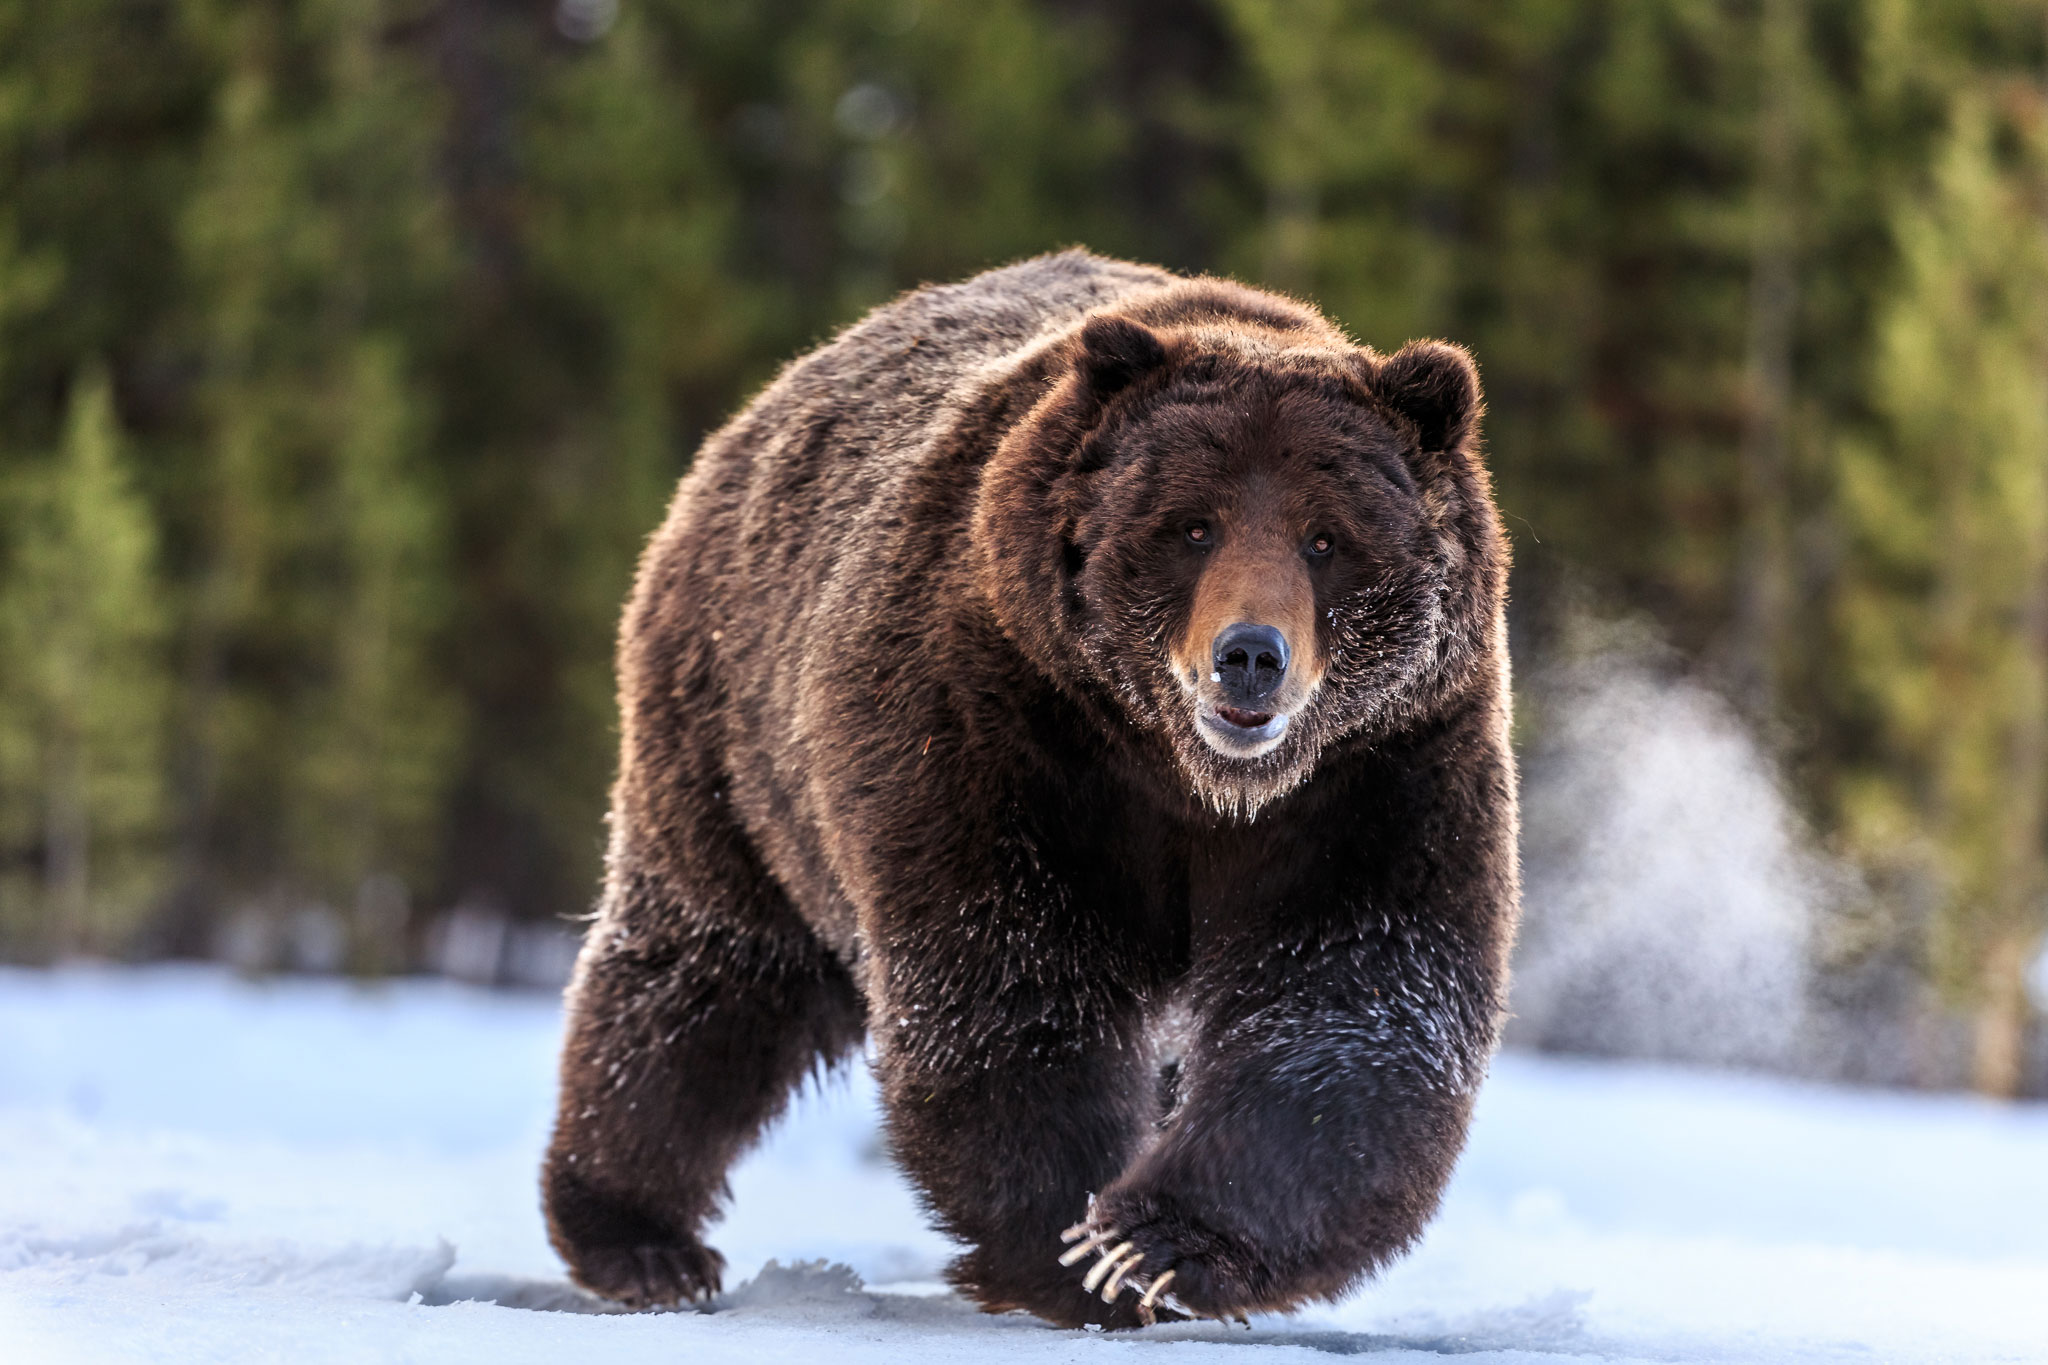 Yellowstone's Grizzly Bears Should Not Be Hunted